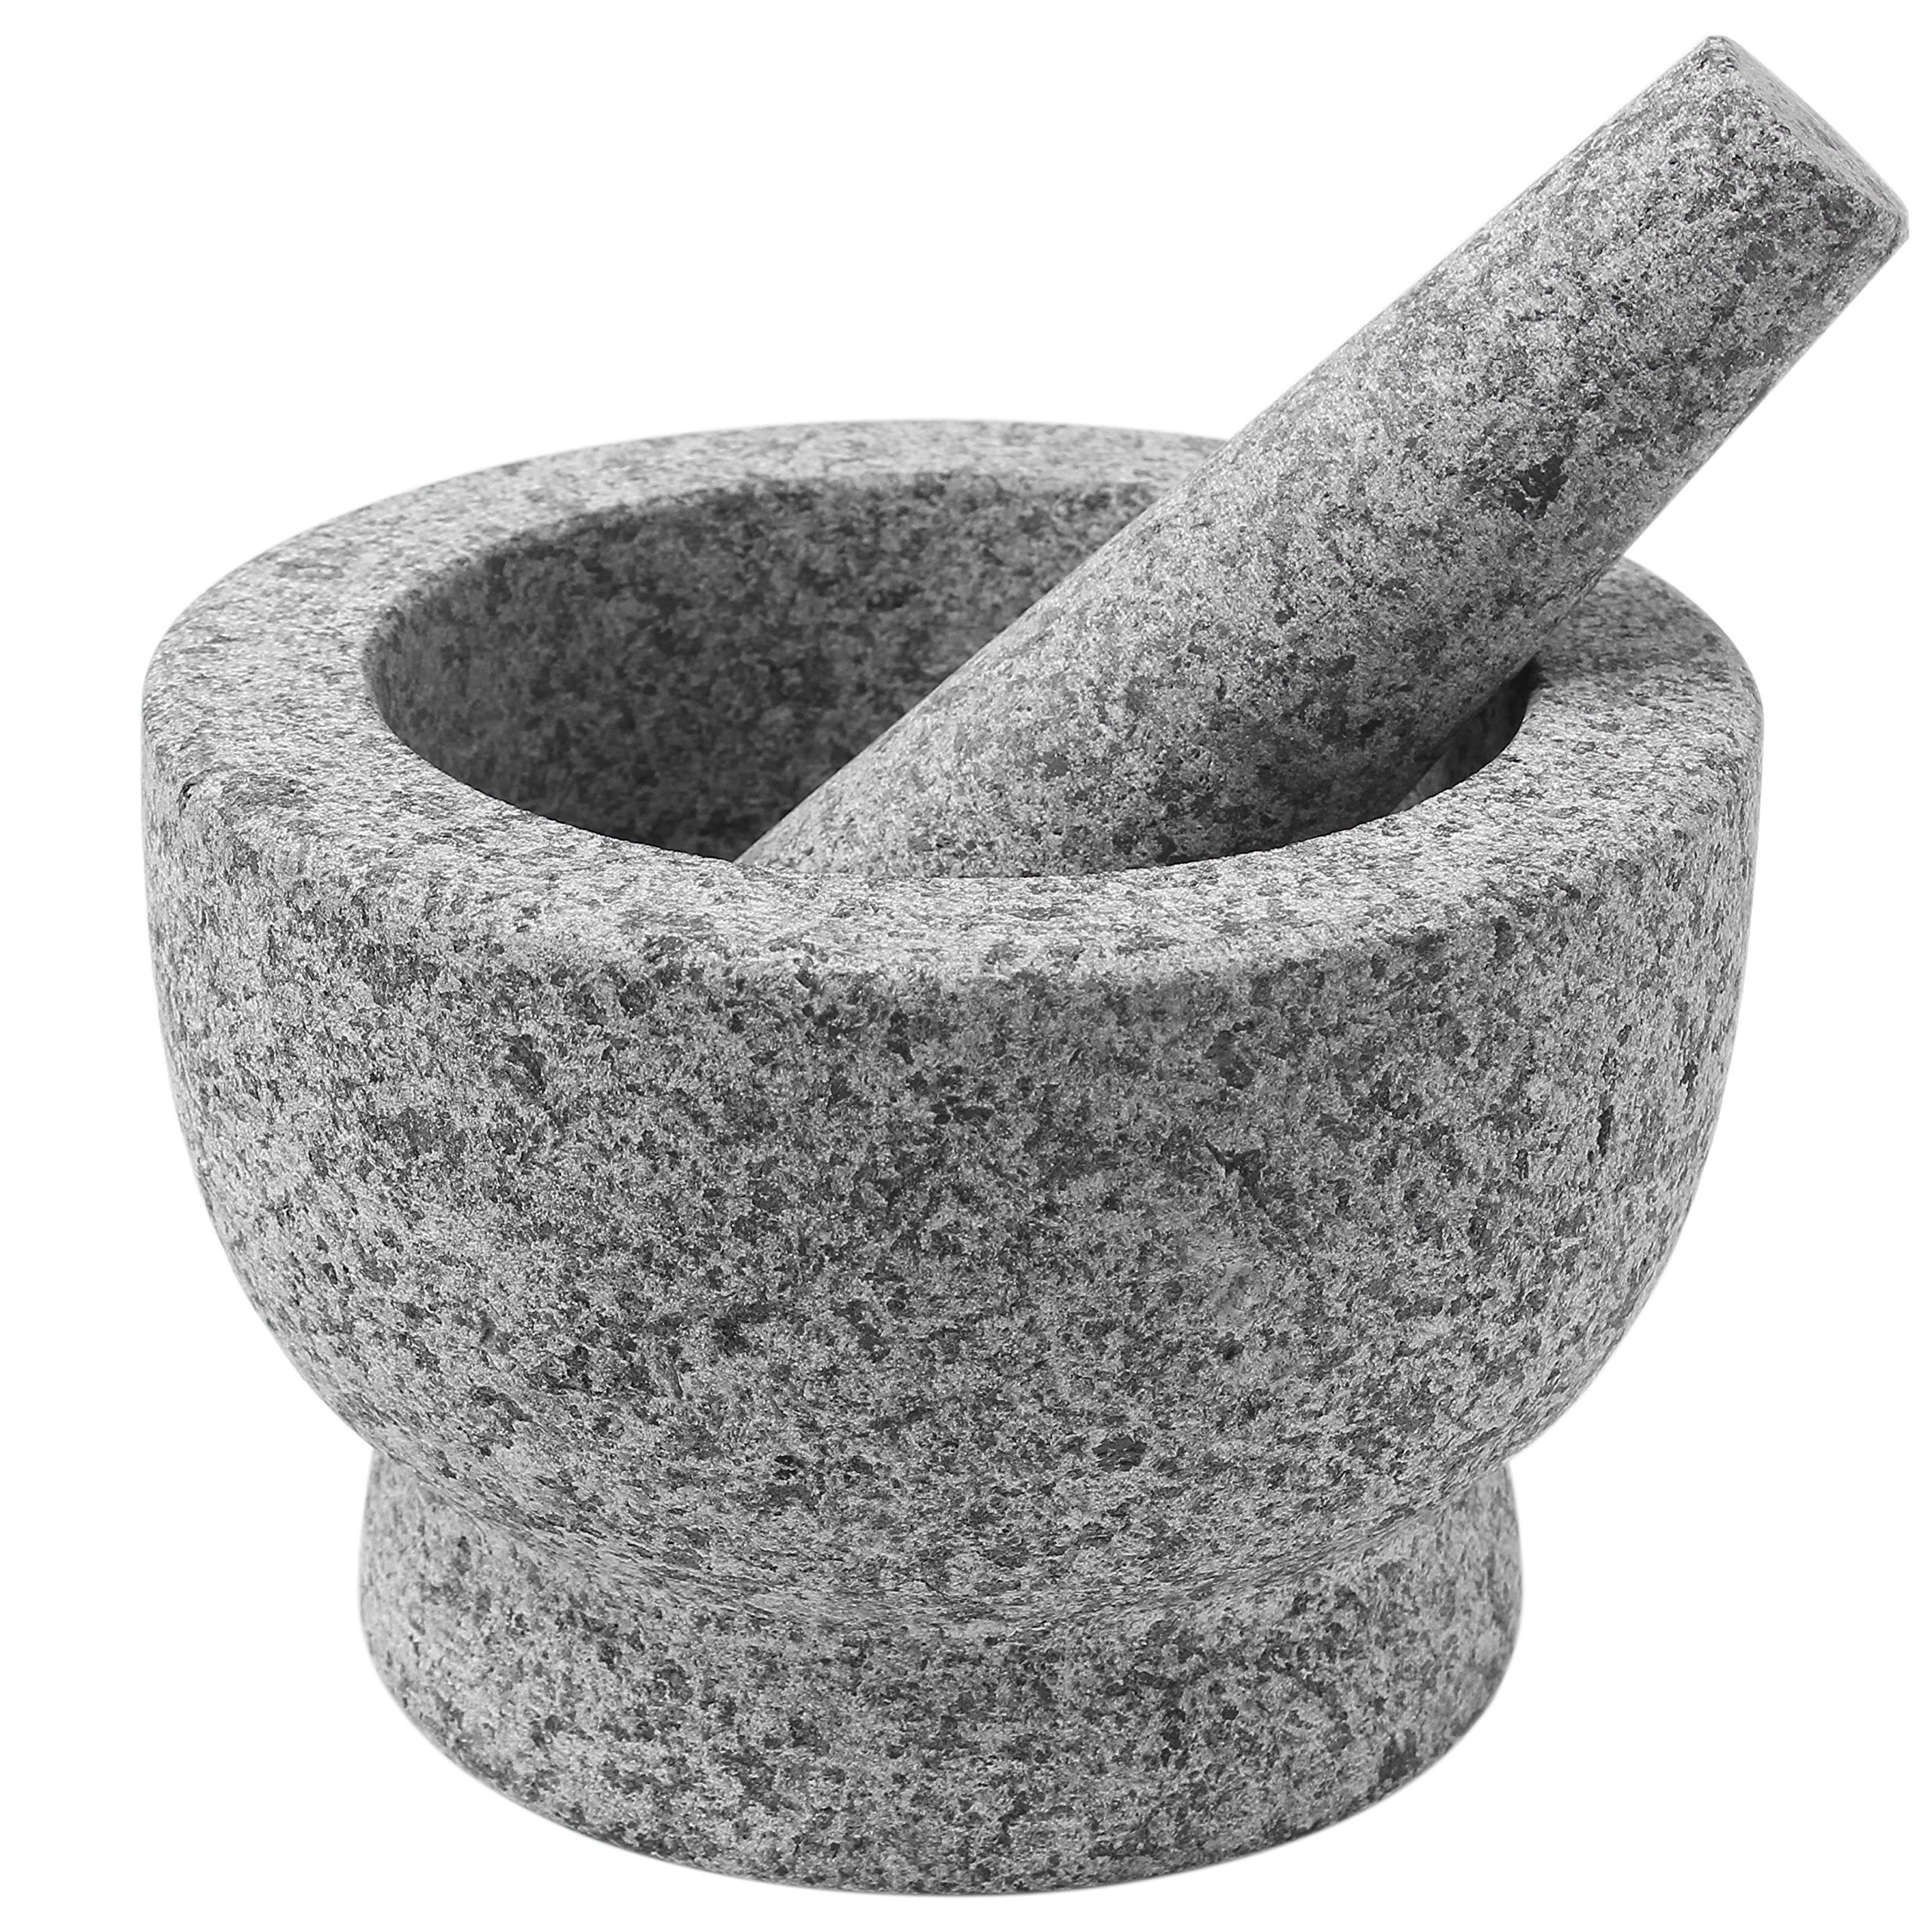 Mortar and Pestle Unpolished Heavy Granite Pouring Lip Spout Anti-Scratch Pad 